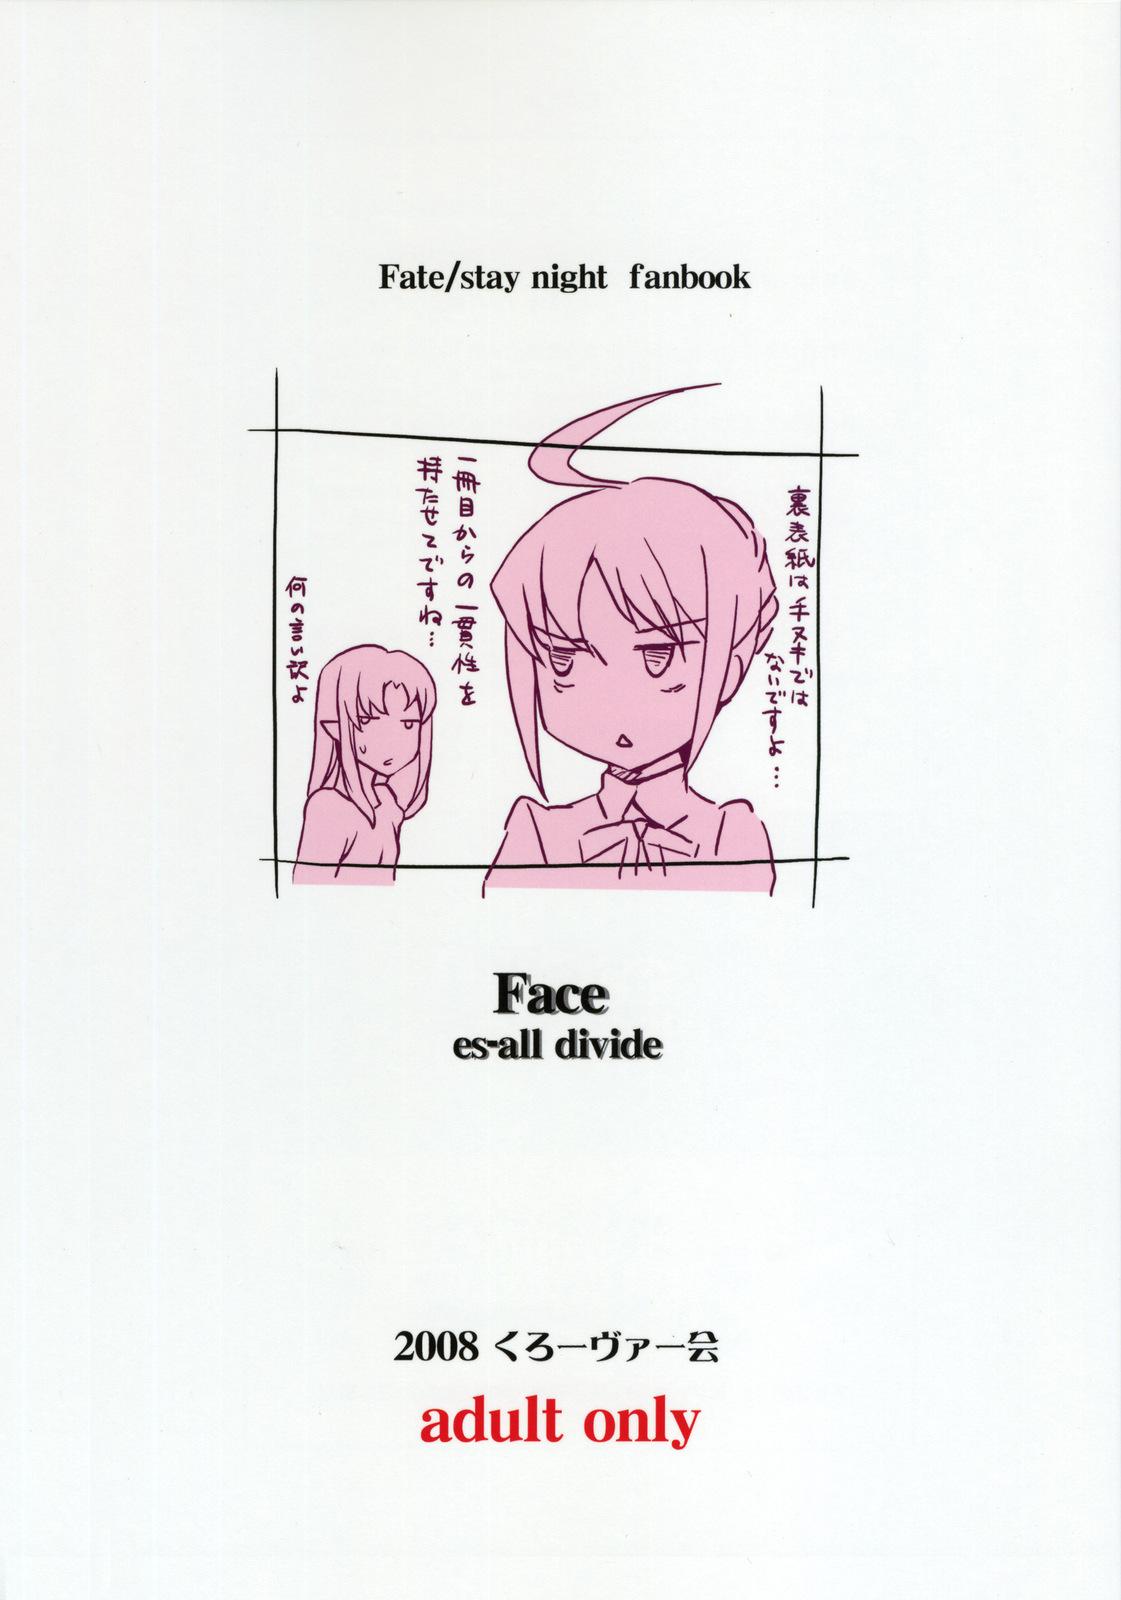 European Face es-all divide - Fate stay night Amateur Porn - Page 144